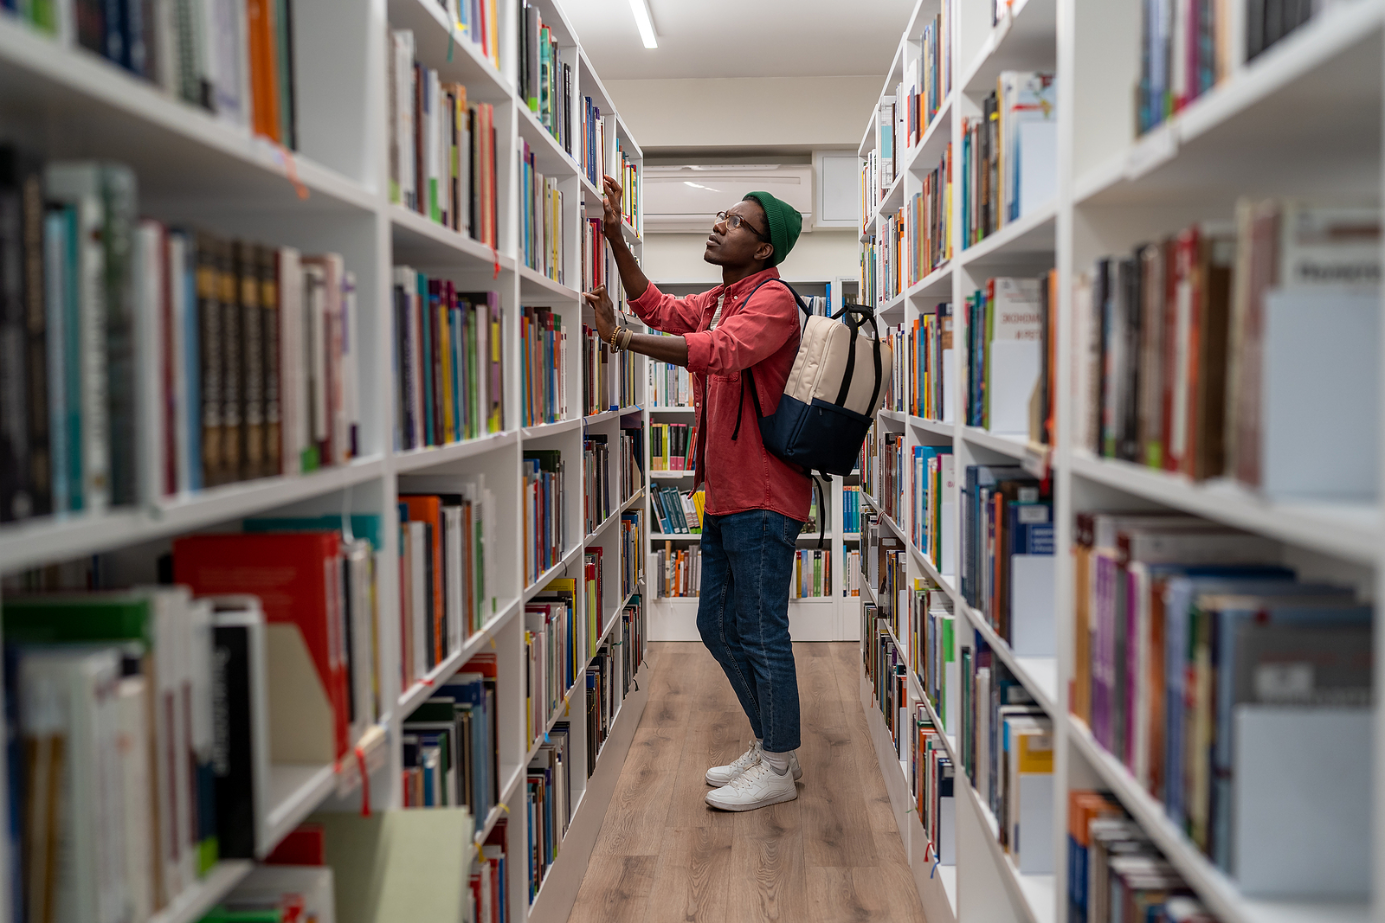 Whether an adolescent does it right or not, how they prepare for college will shape future academic and personal success. Young adults on the cusp of newly found autonomy may still require scaffolding to help them navigate the right next steps.